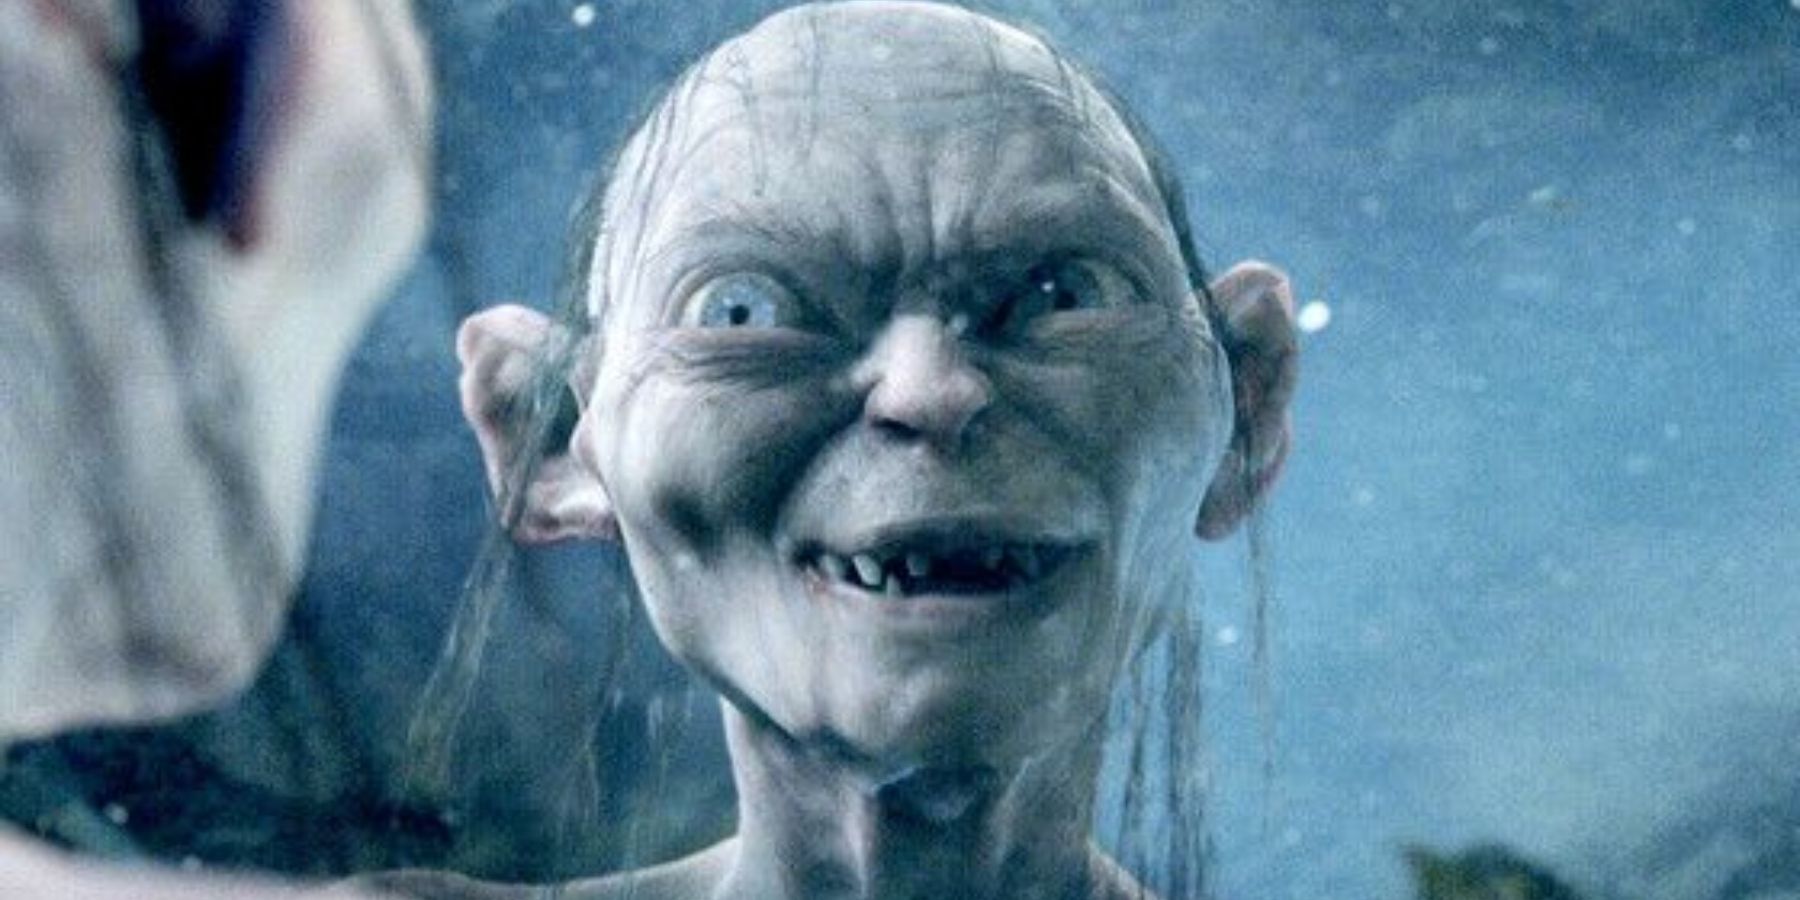 What in the Middle-Earth are reviewers saying about The Lord of the Rings:  Gollum? - Xfire